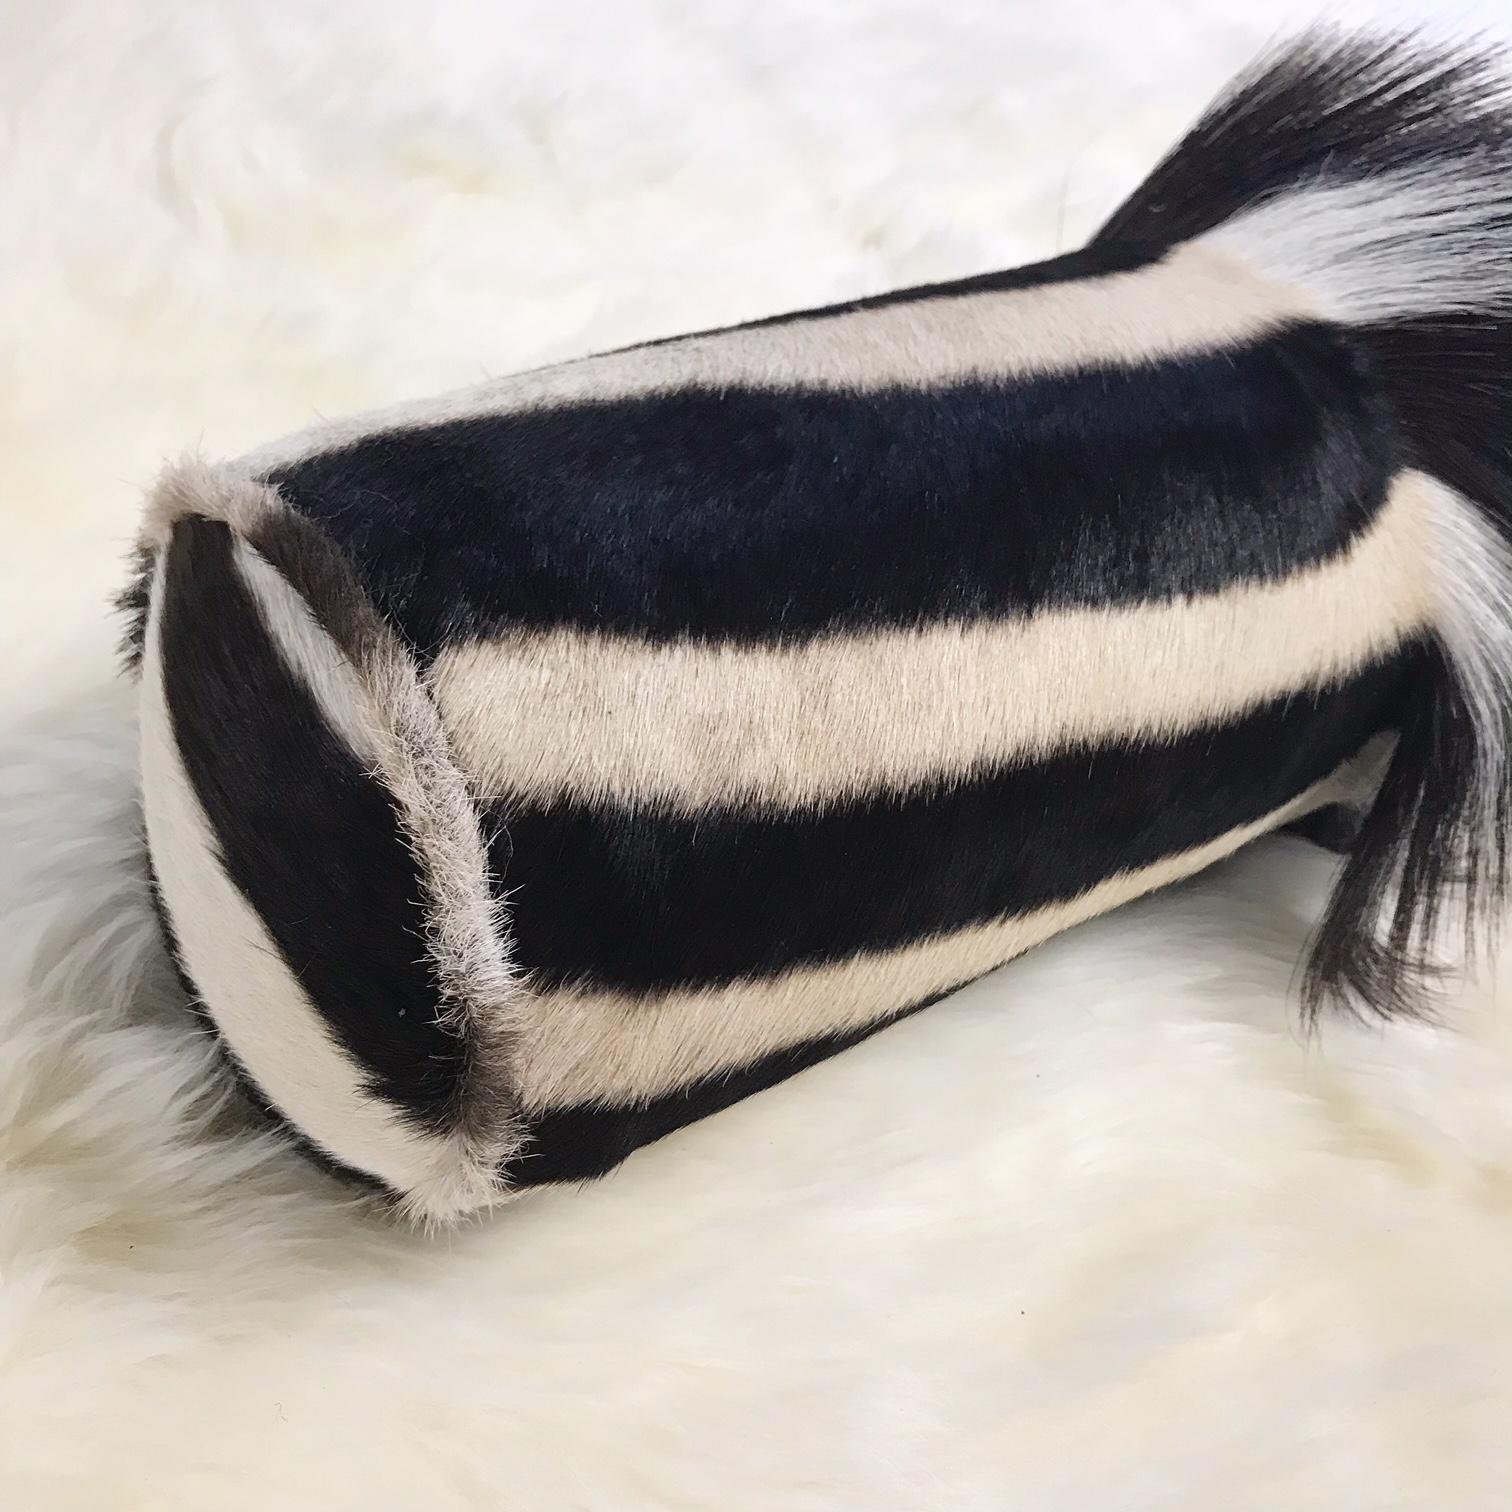 Forsyth zebra hide pillows are simply the best. The most beautiful hides are selected, hand cut, hand stitched, and hand stuffed with the finest goose down. Each step is meticulously curated by Saint Louis based Forsyth artisans. Every pillow is a